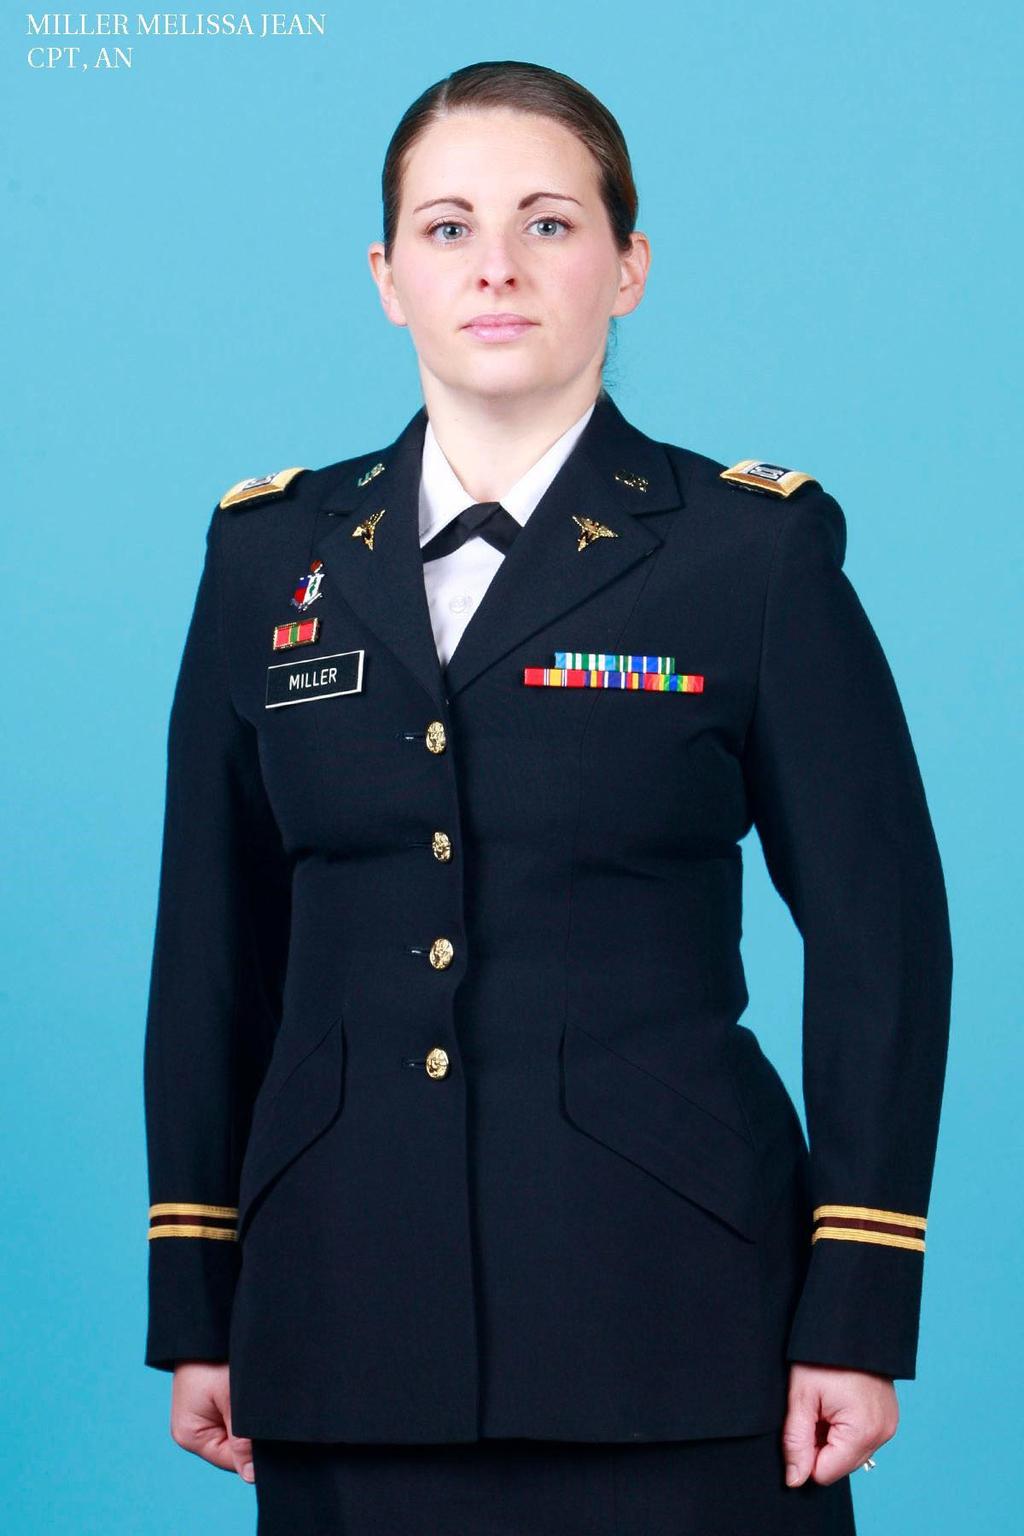 Nursing in the Military Captain Melissa J. Miller joined the United States Army as an active duty nurse in 2010.